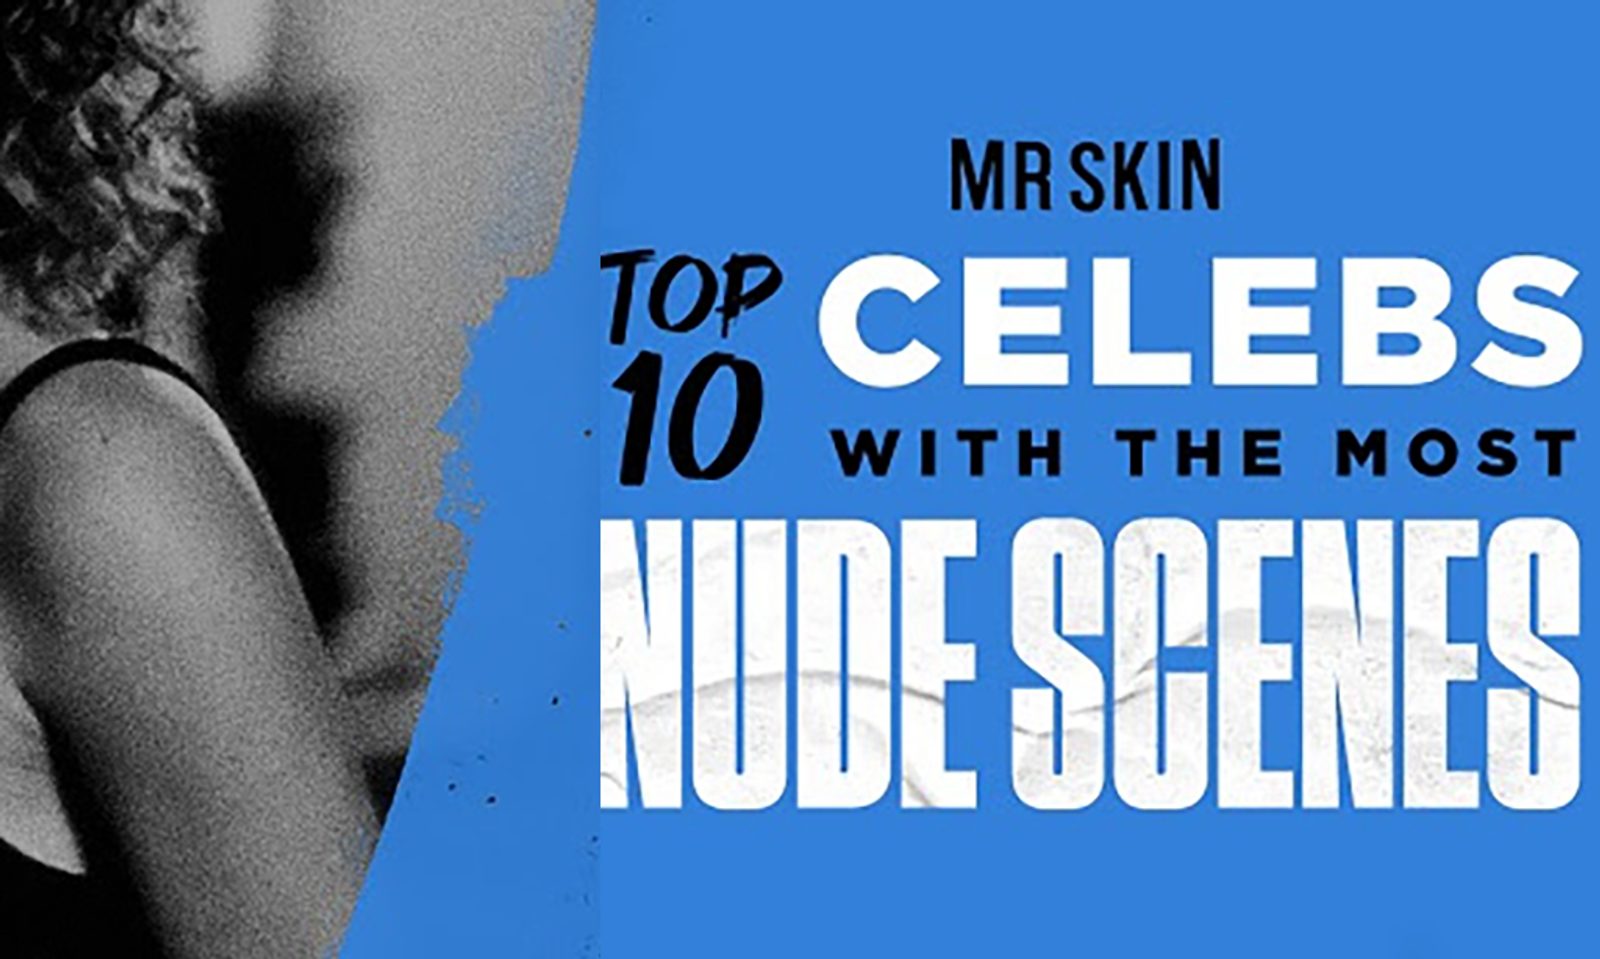 Mr. Skin Lists Celebs With Most Nude Scenes